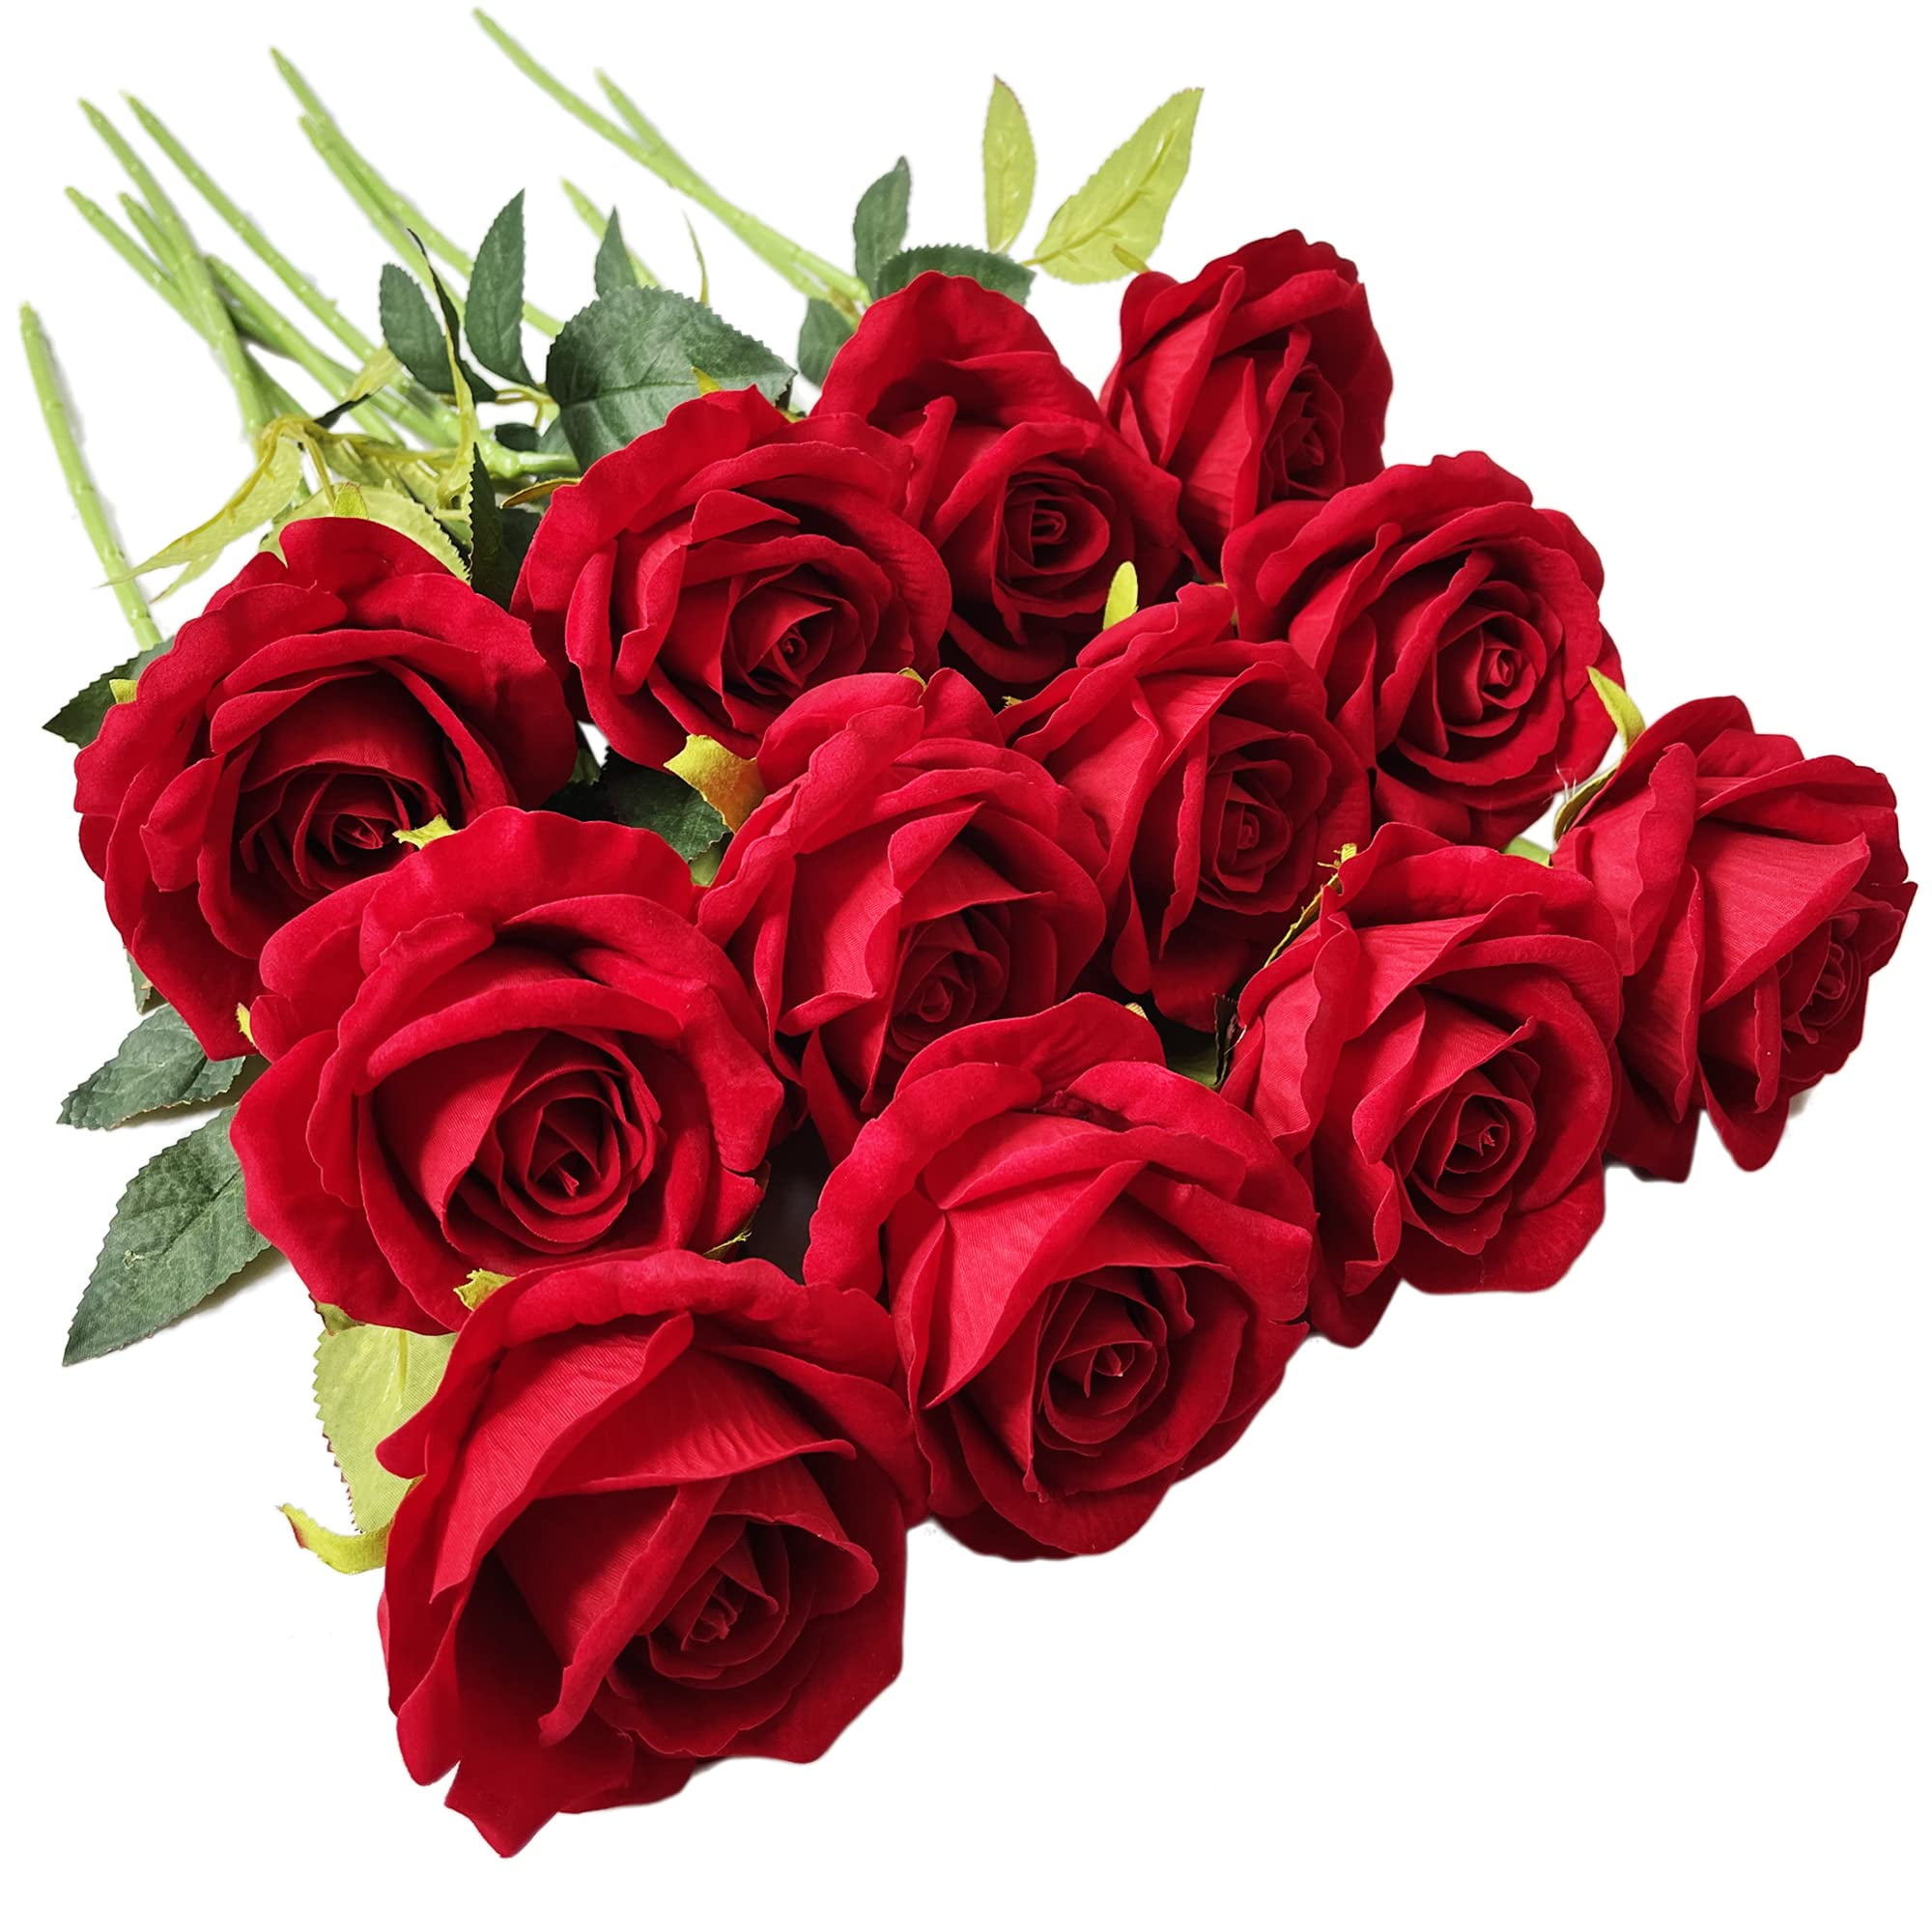 12 Pcs Artificial Rose Flowers Red Blossom Rose Flowers Real Touch Silk  Faux Roses with Stem Rose Bouquets for Home Decoration Wedding Party Garden